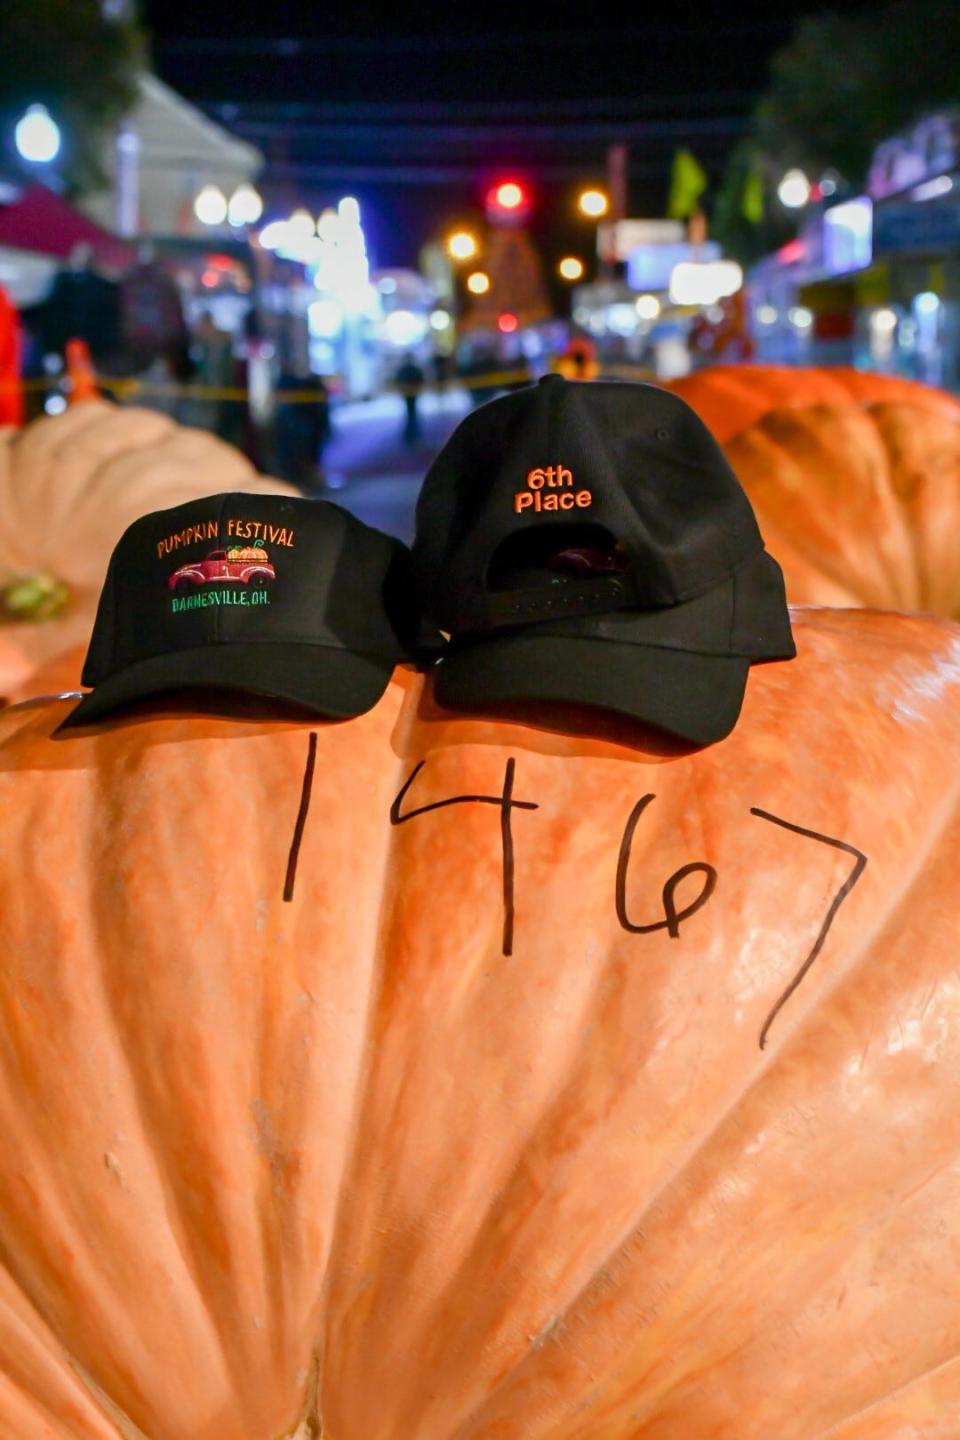 A 1,476-pound pumpkin grown by inmates at the Belmont Correctional Institution. The giant took sixth place in the weigh-in at the annual Barnesville Pumpkin Festival.